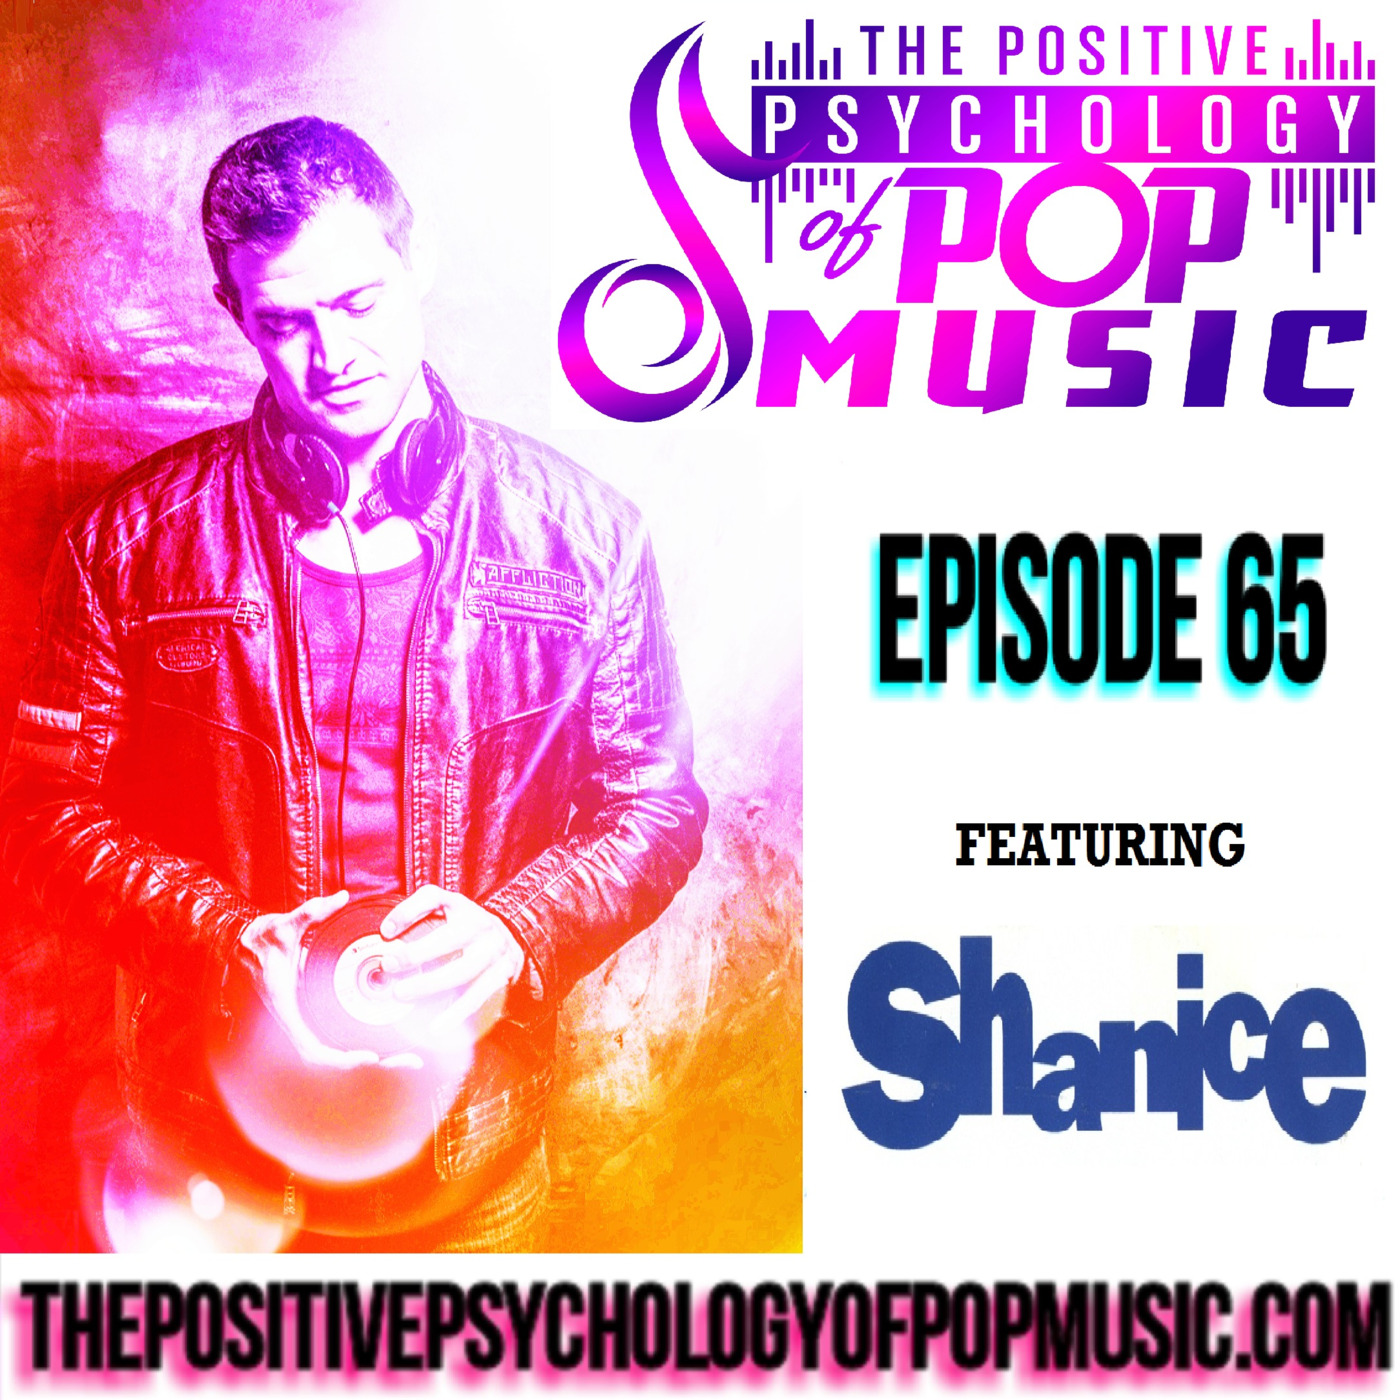 Shanice on The Positive Psychology of Pop Music! - Episode 65